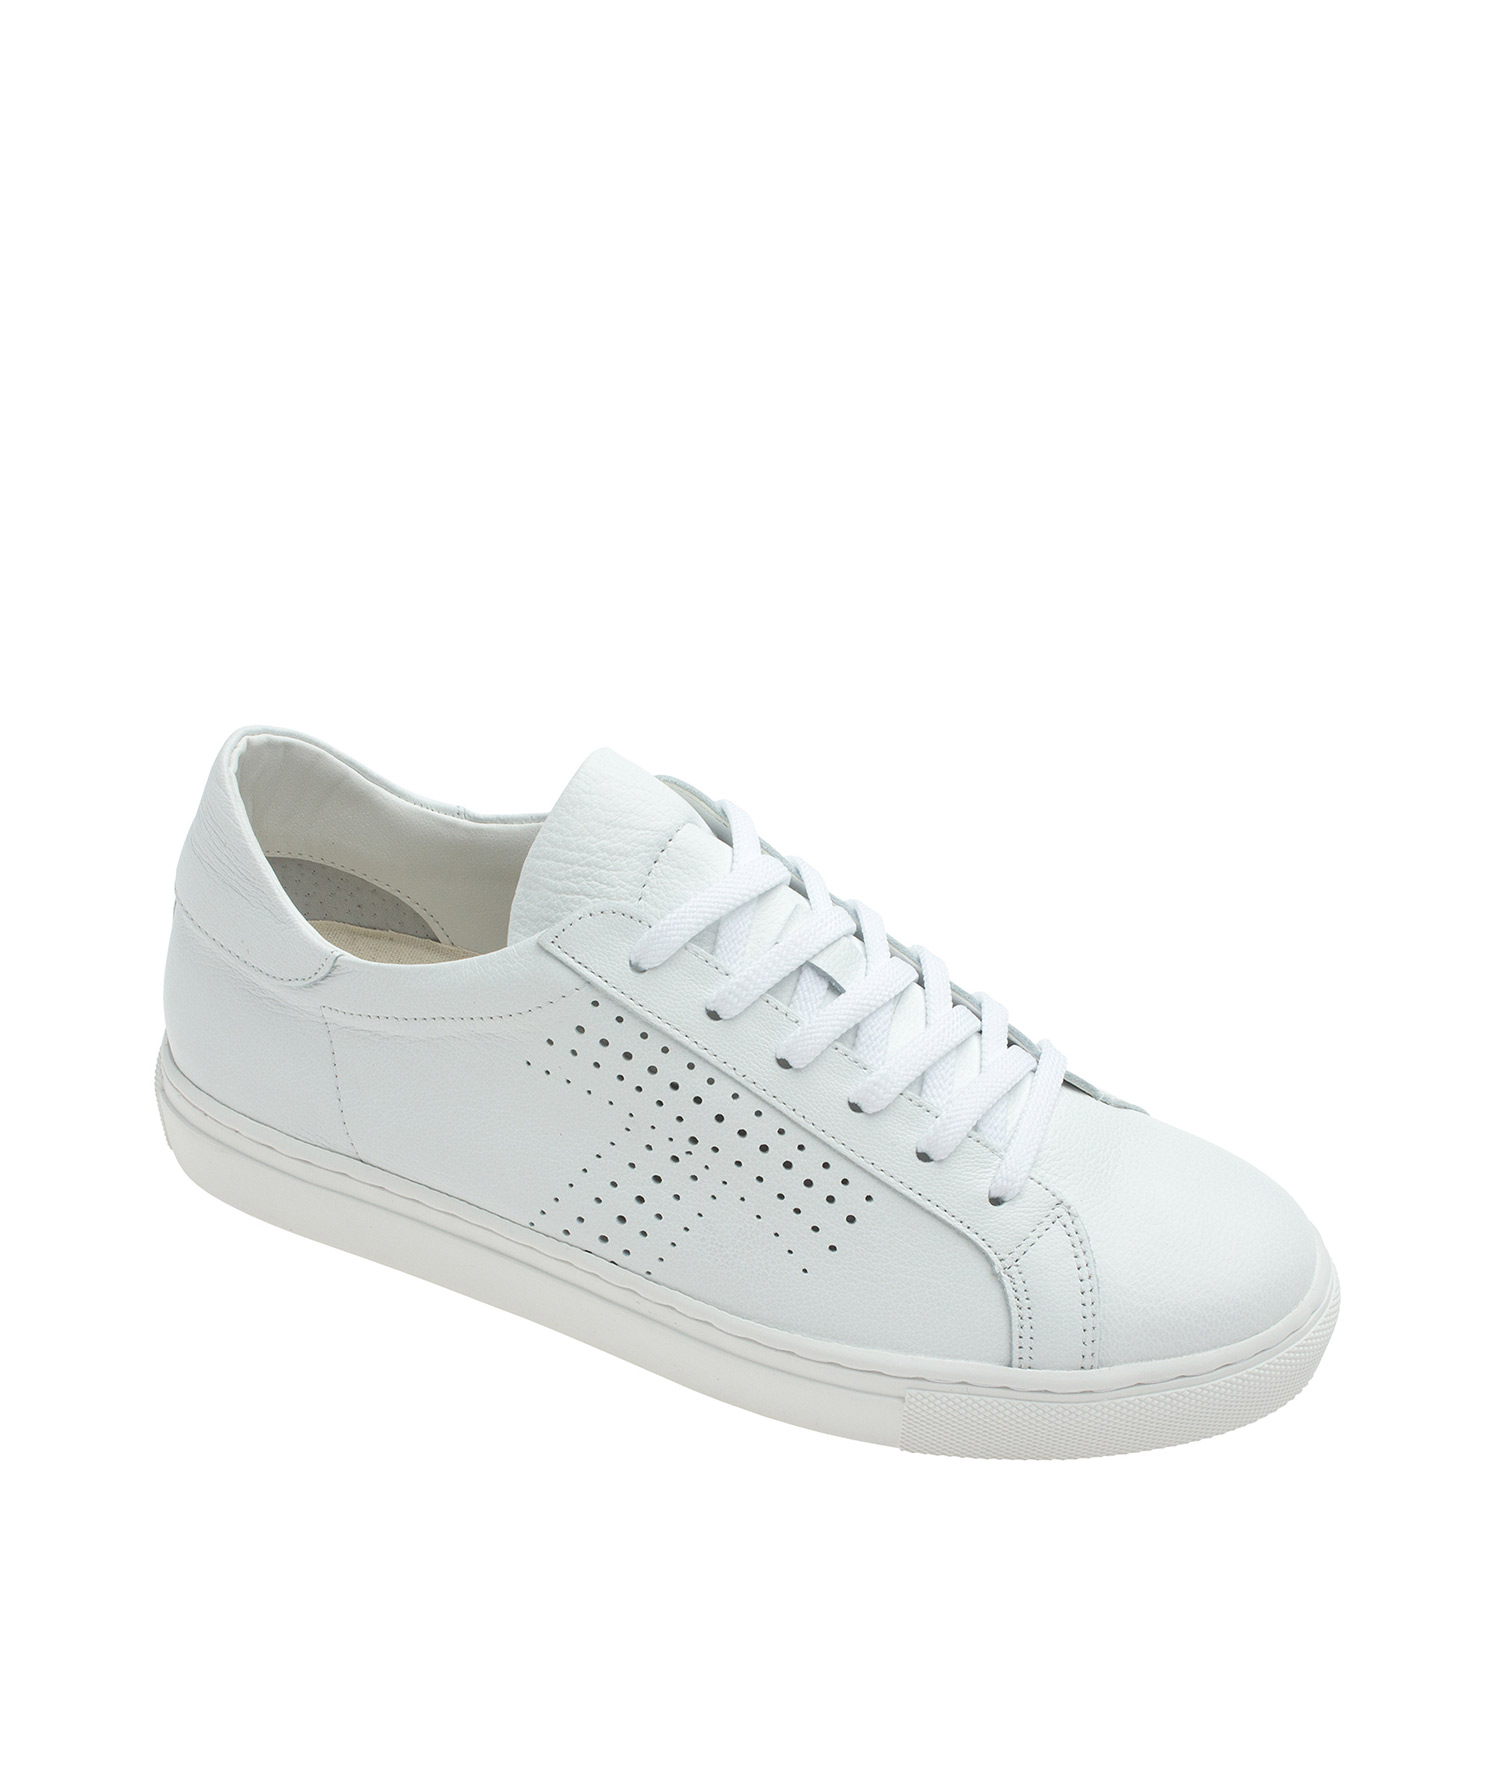 leather lace up sneakers womens